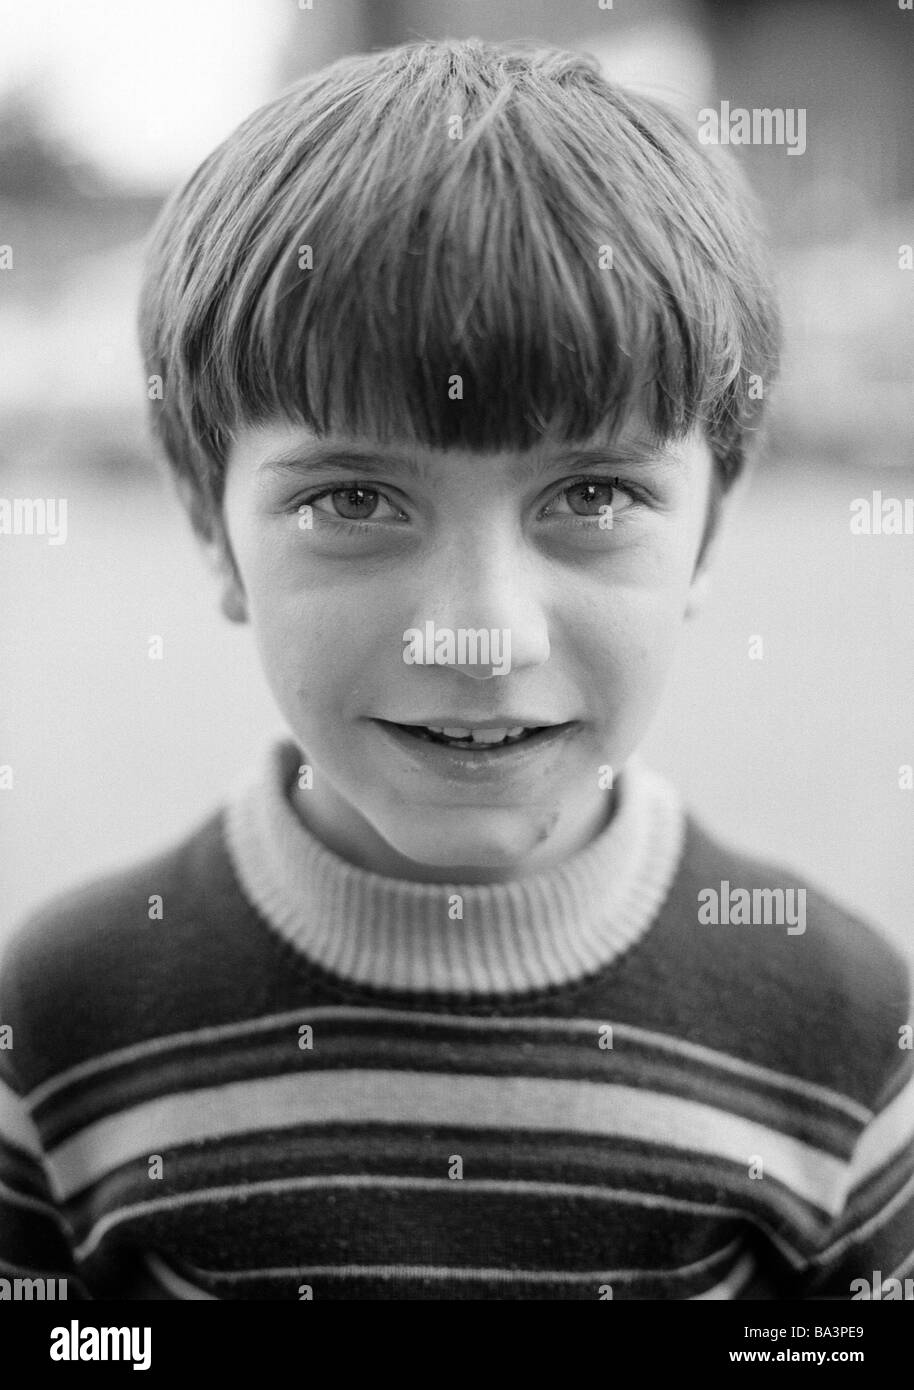 Seventies, black and white photo, people, children, little boy, portrait, aged 9 to 12 years Stock Photo